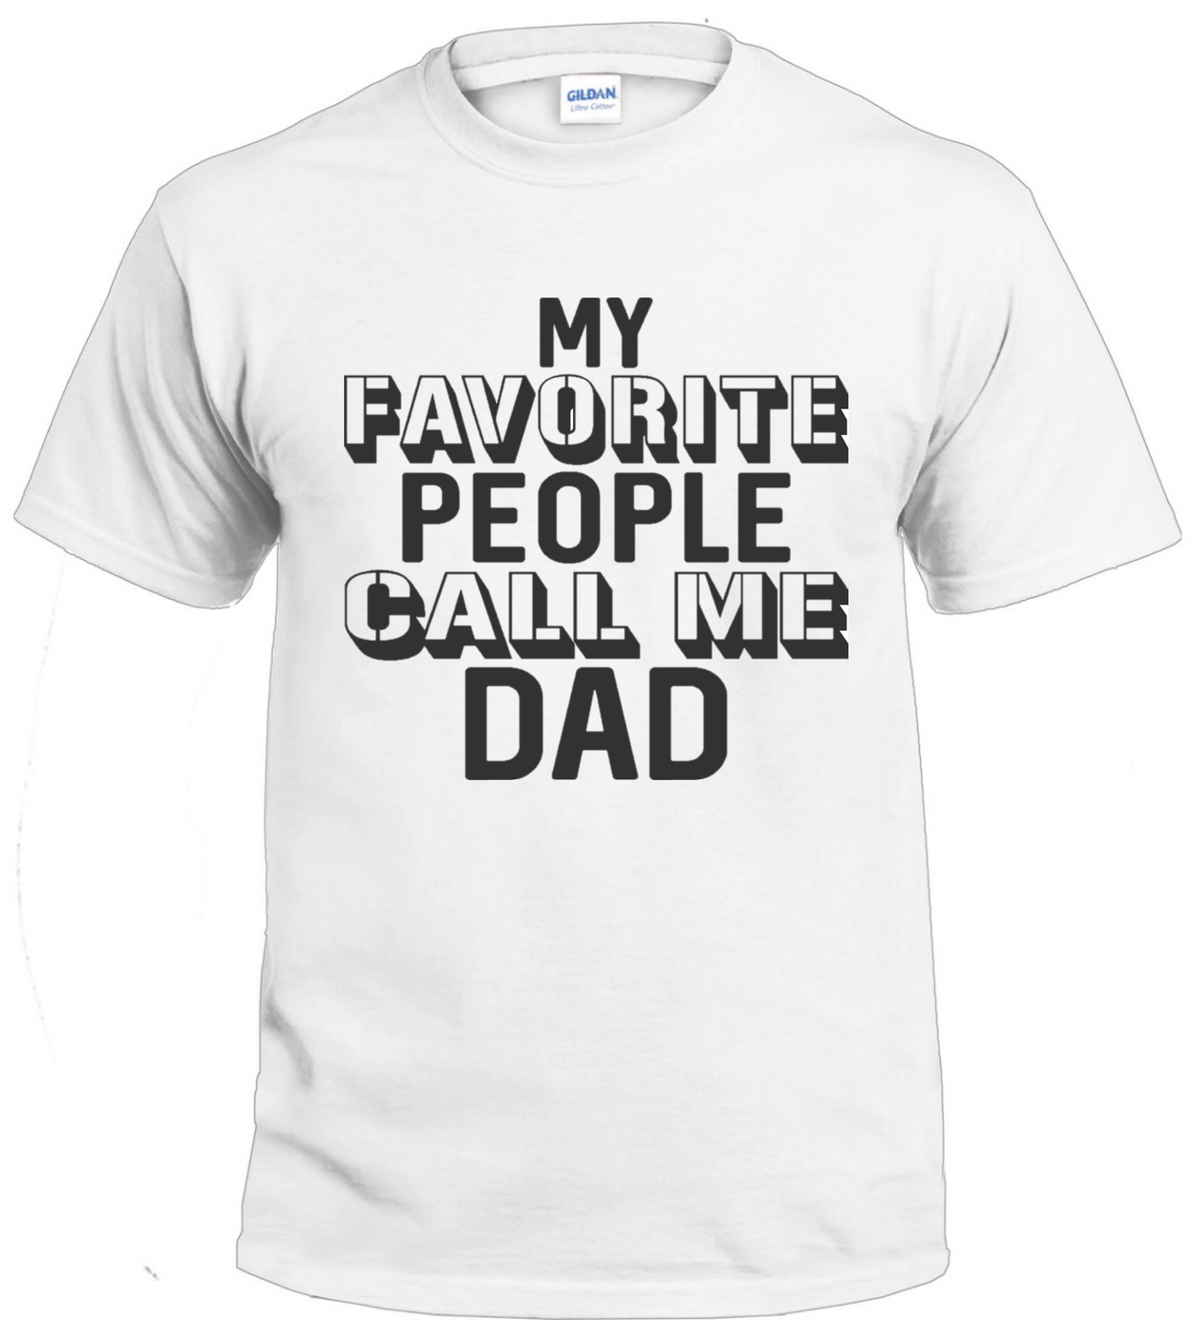 My Favorite People Call Me Dad t-shirt